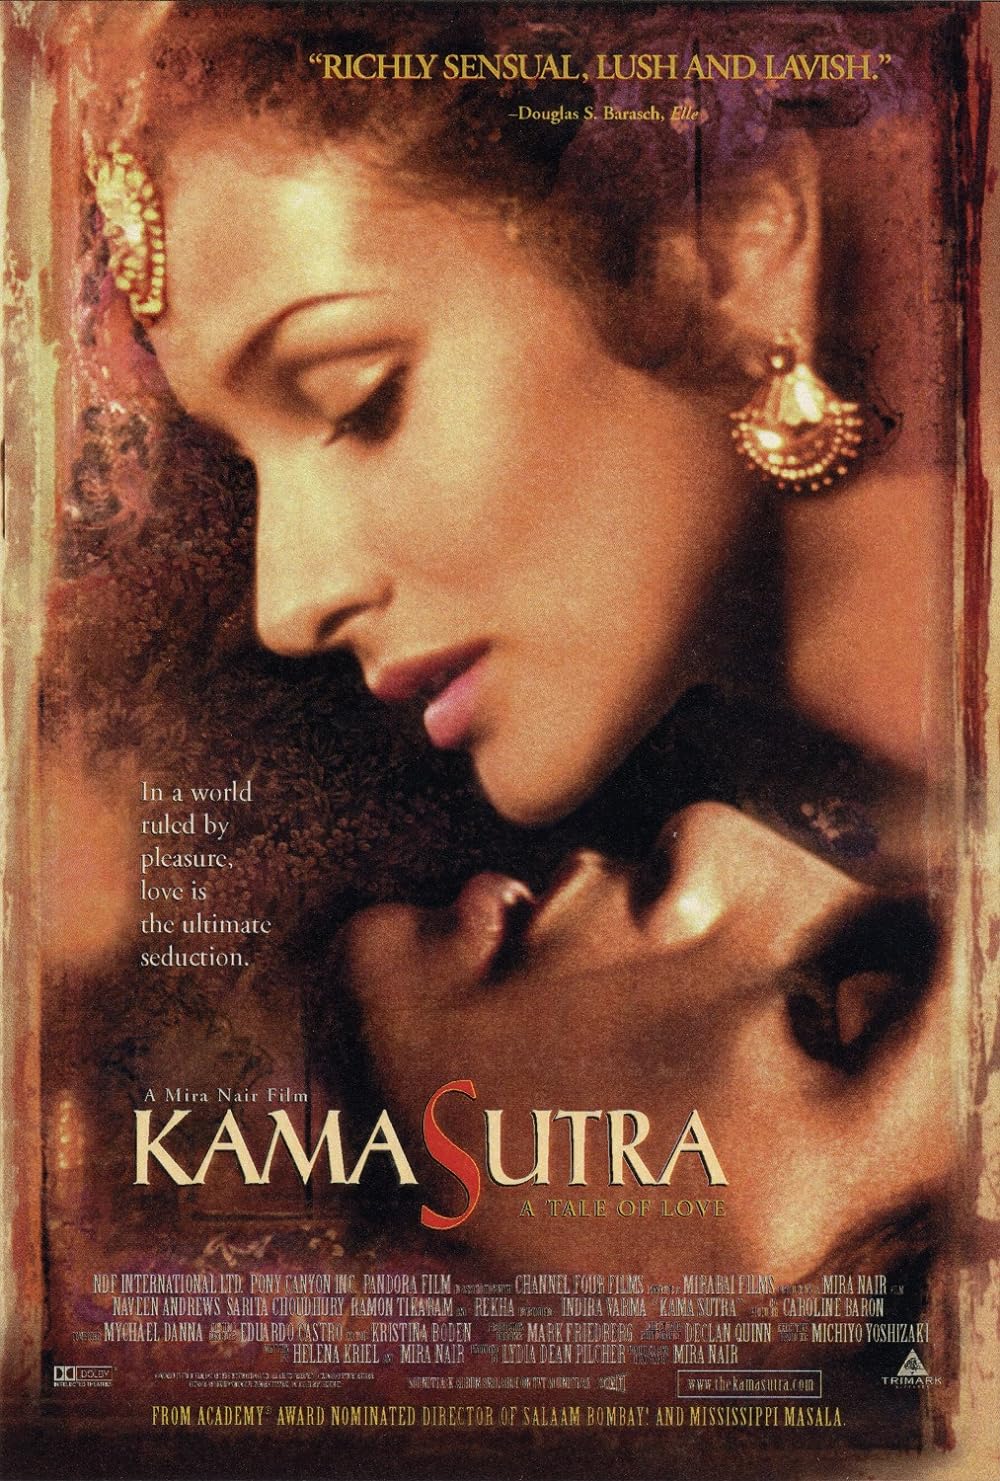 bubba william recommends Watch Karma Sutra Movie